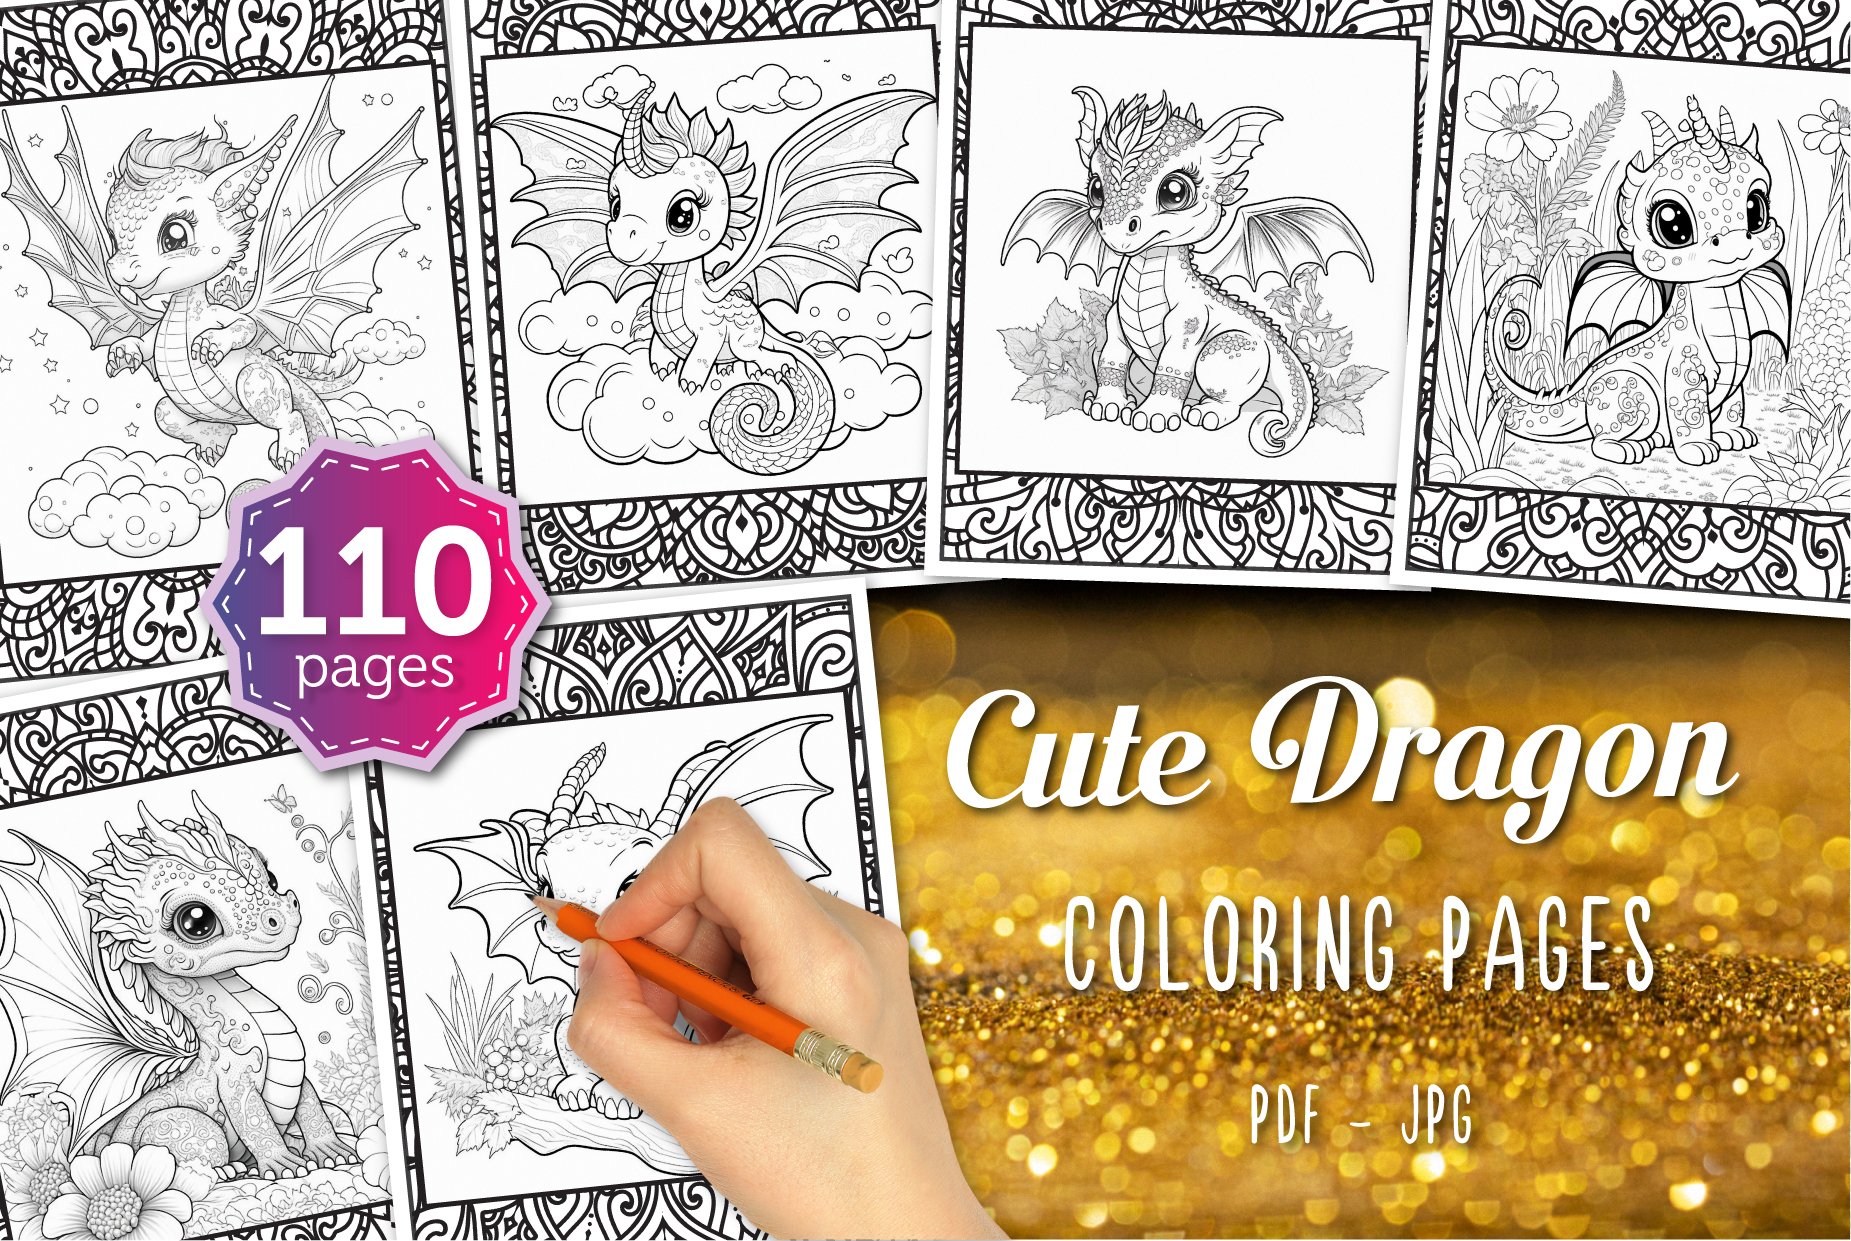 Cute dragon coloring pages animal illustrations creative market